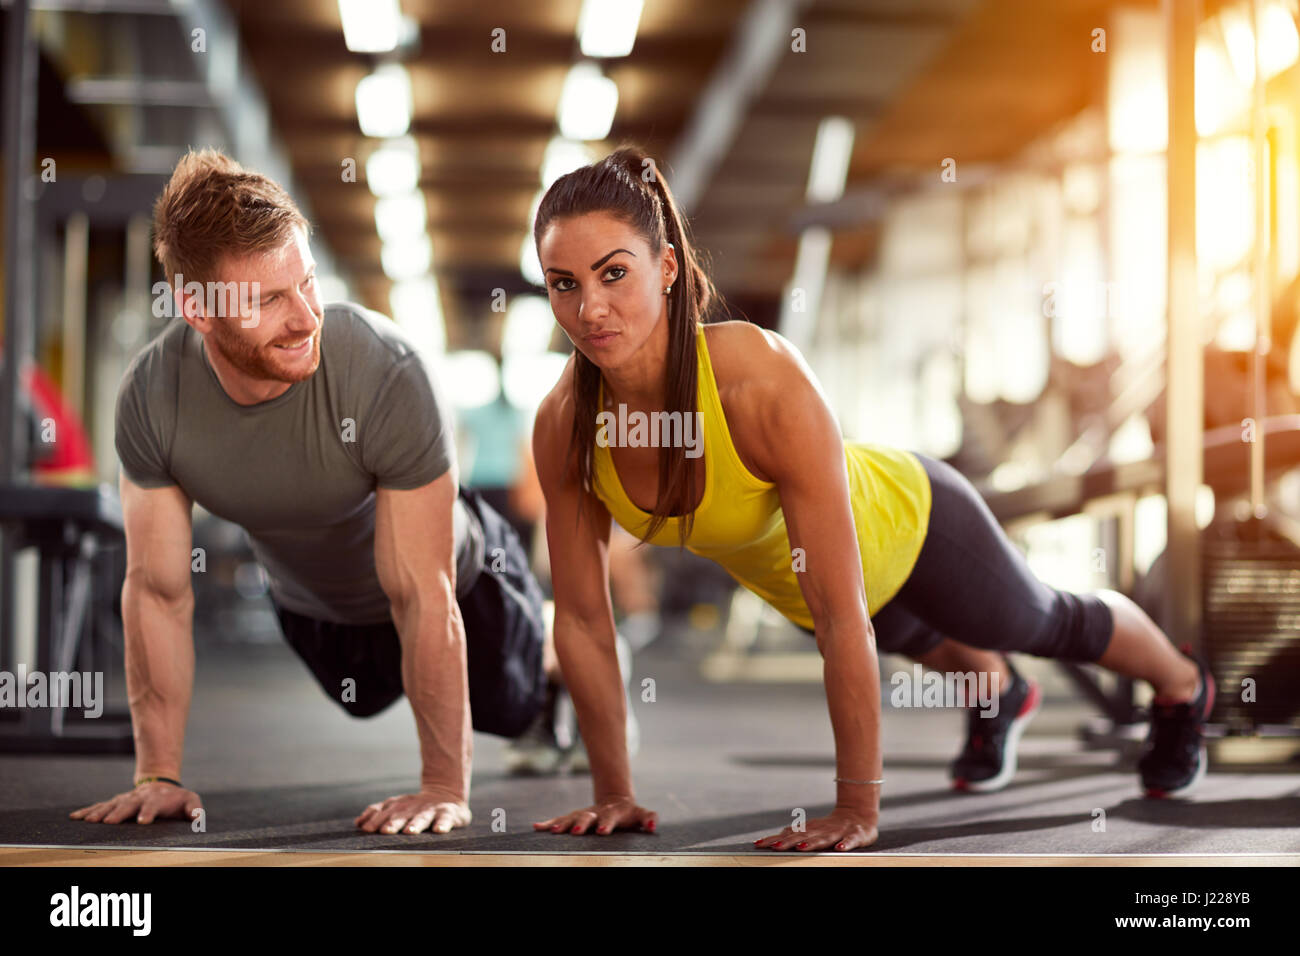 Couple on exhausting fitness training together Stock Photo